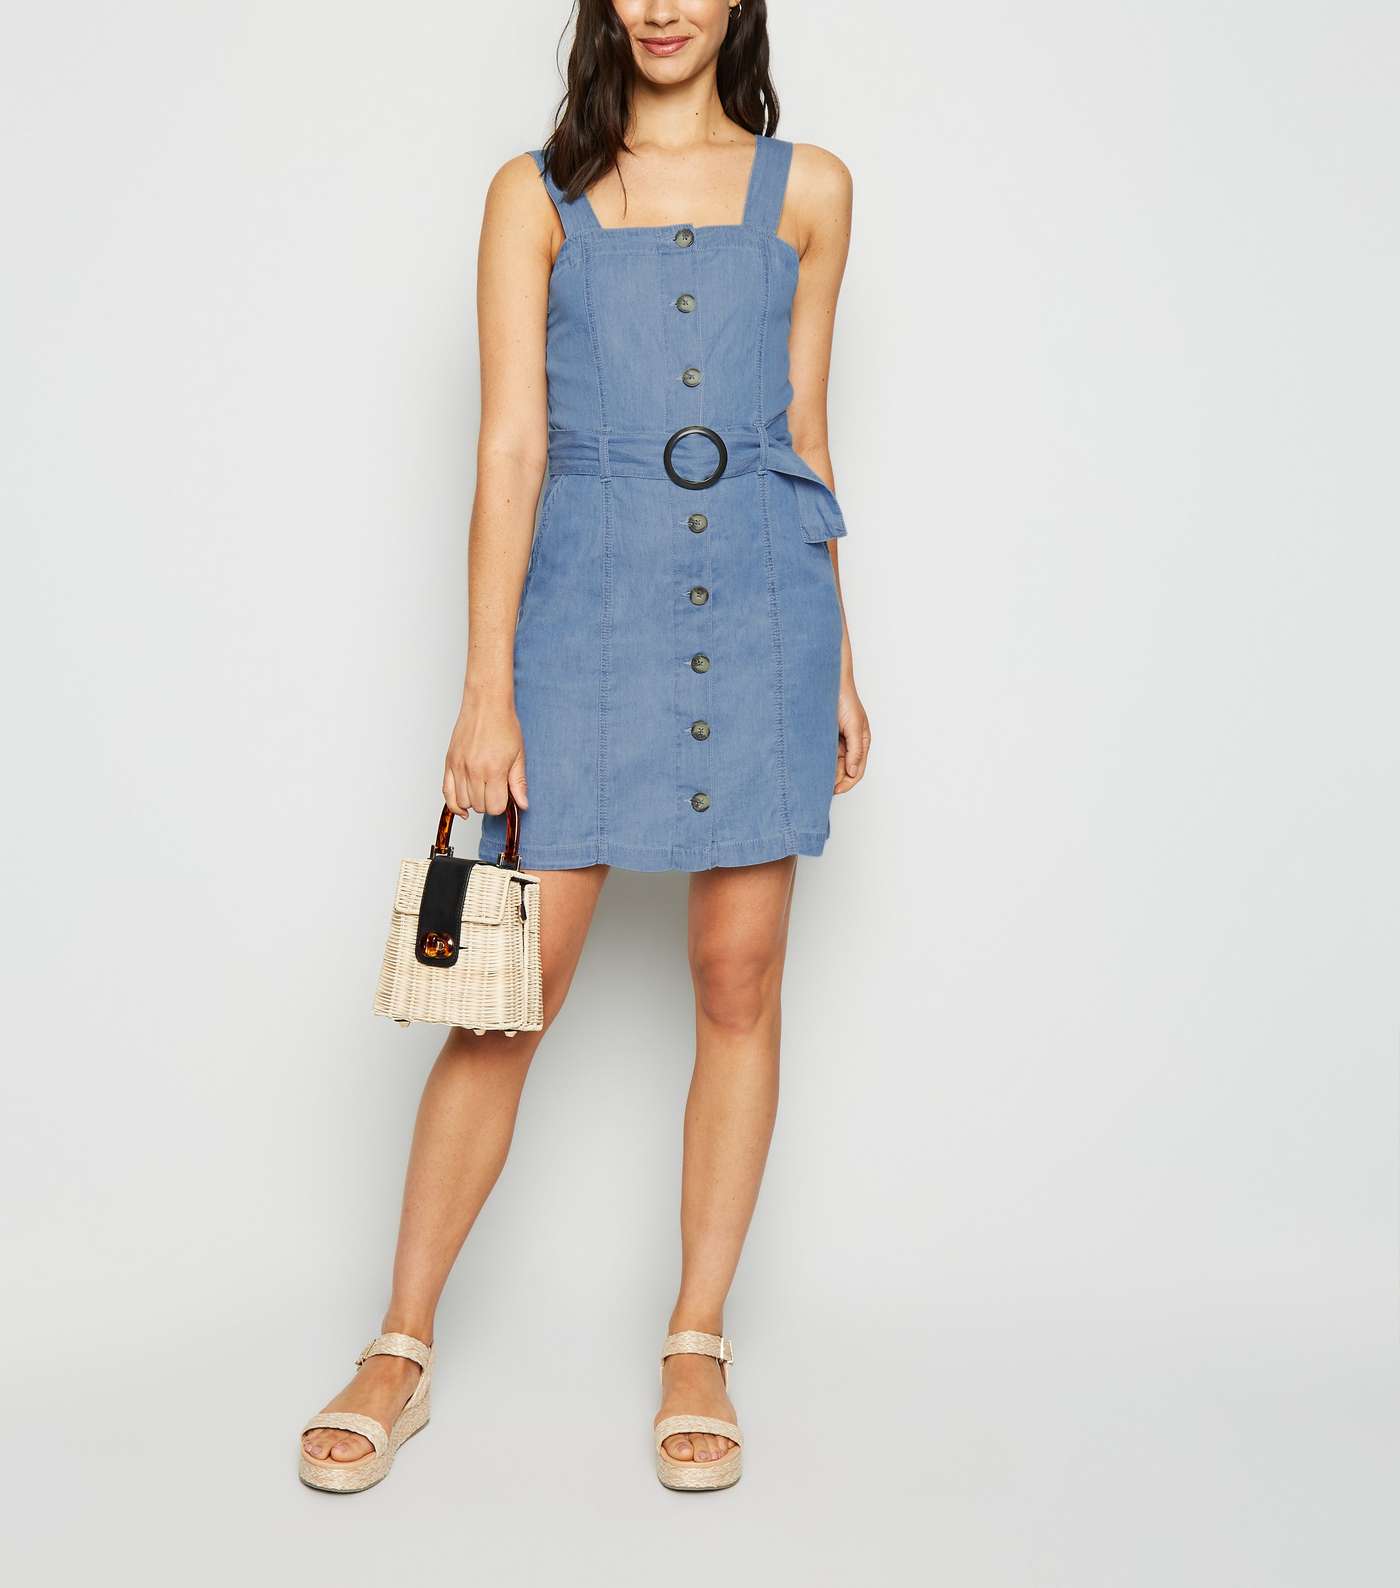 Urban Bliss Bright Blue Button Up Dress Image 2